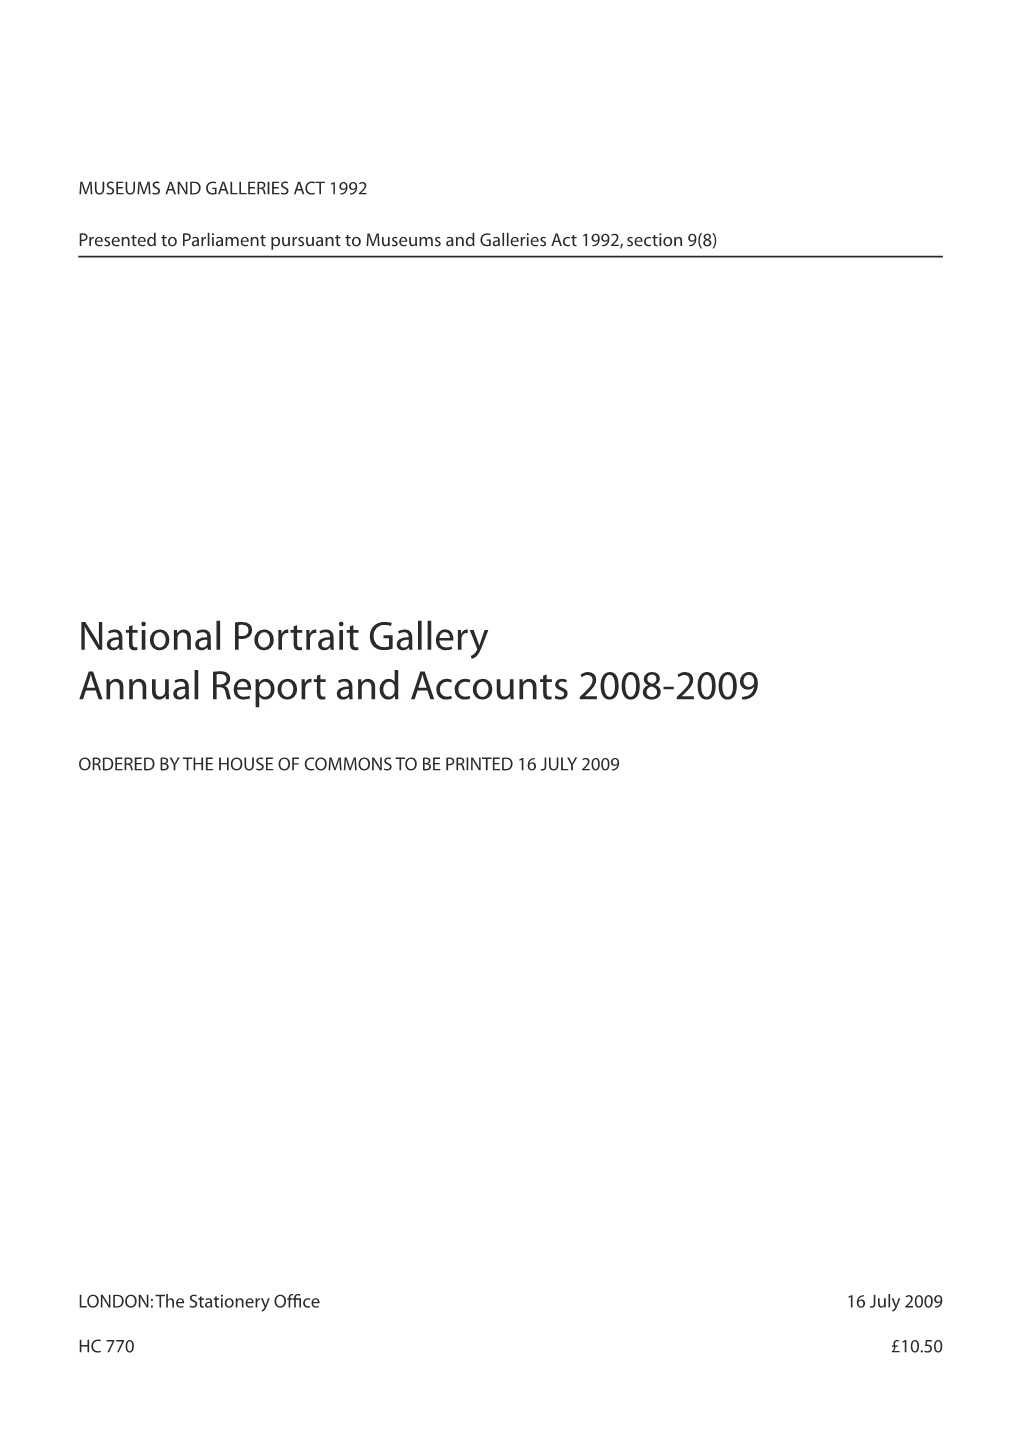 National Portrait Gallery Annual Report and Accounts 2008-2009 HC